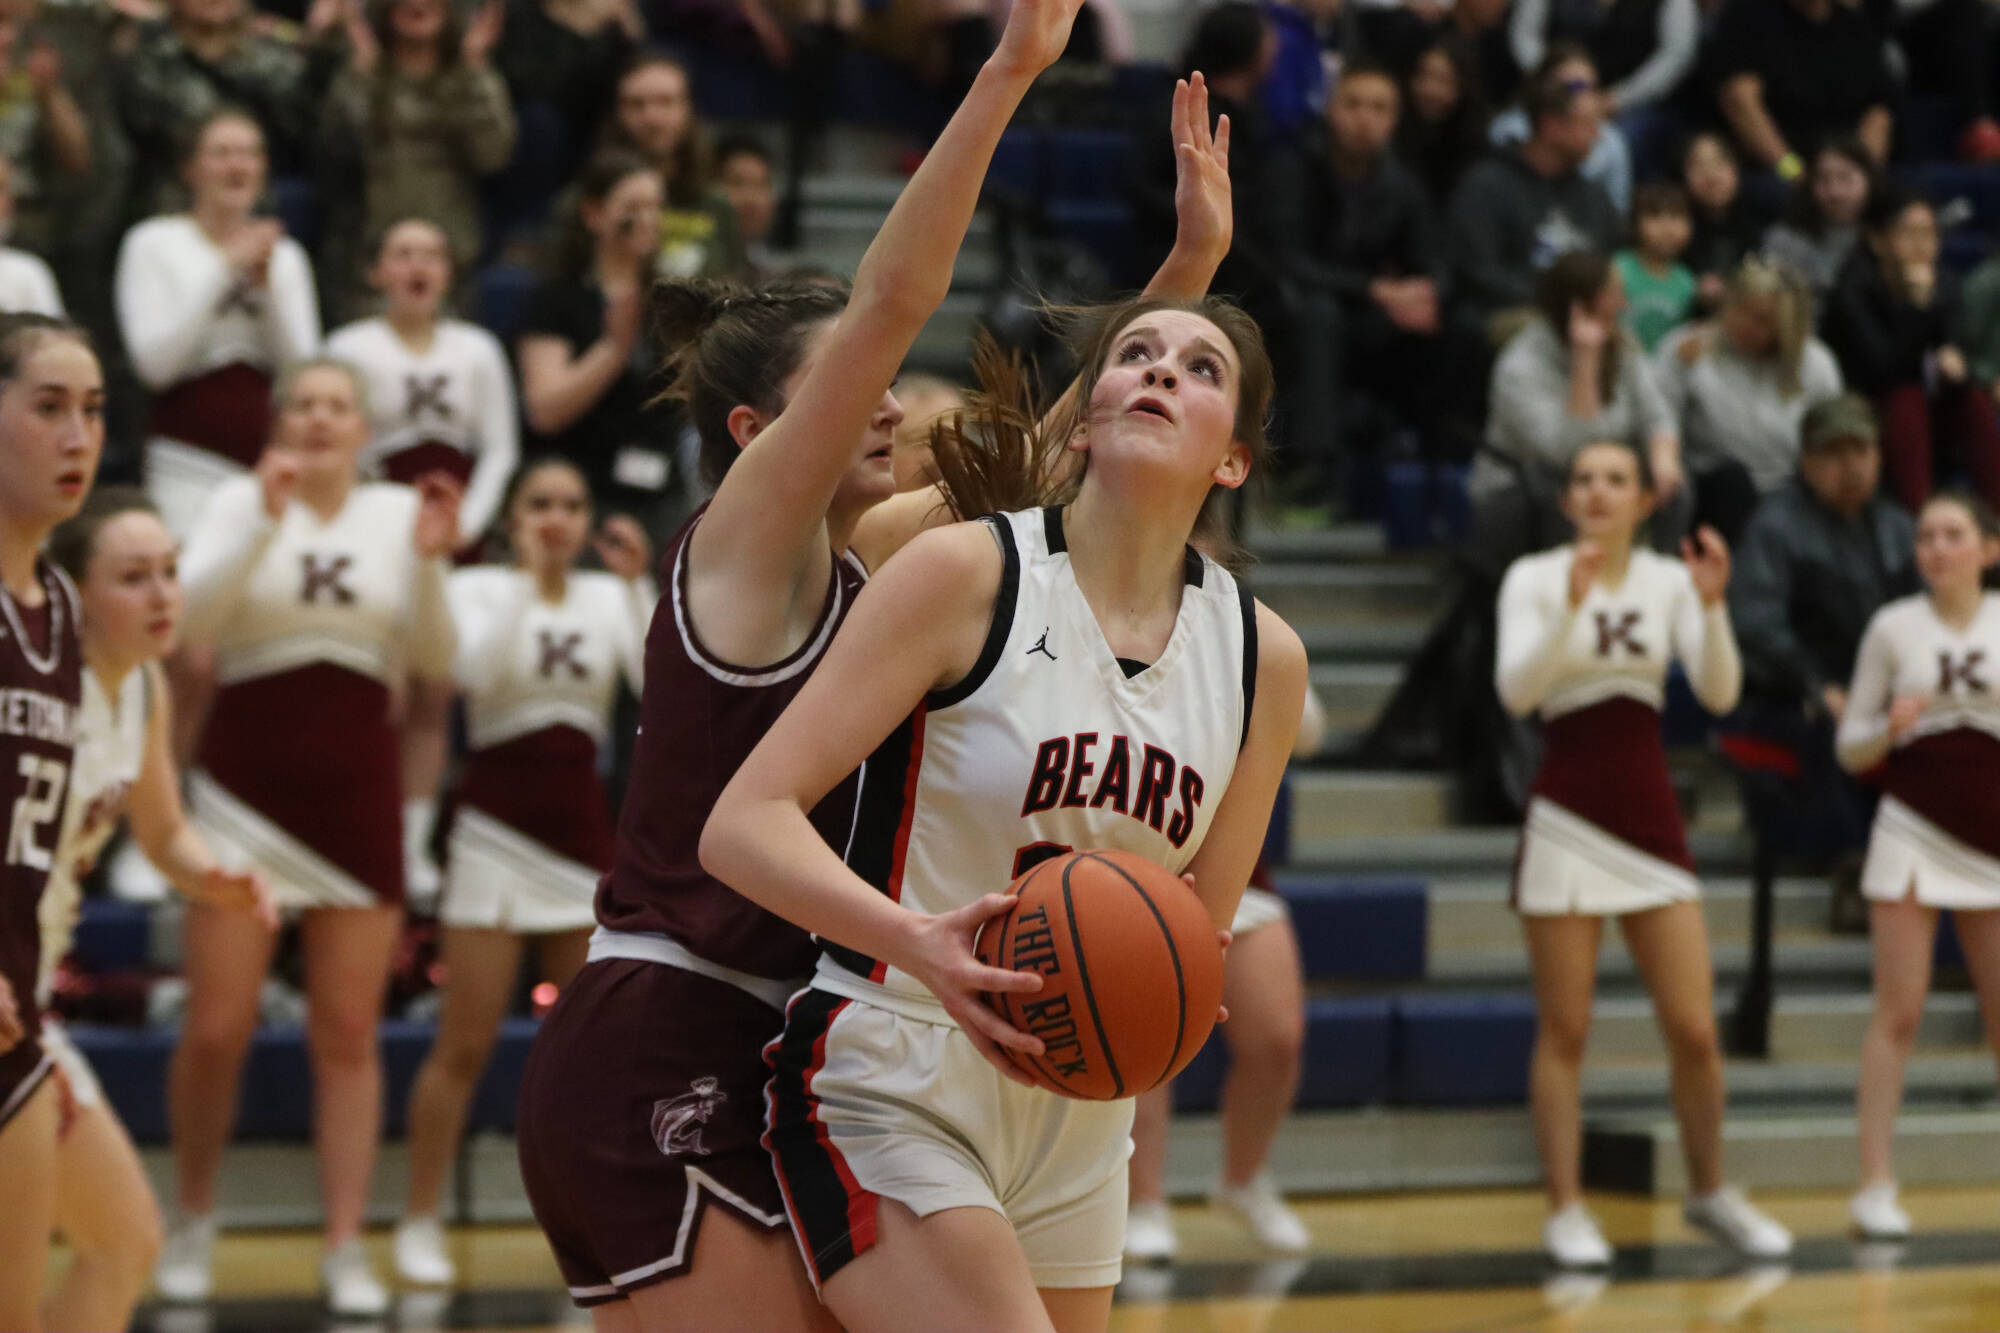 JDHS junior Mila Hargrave sets her eyes on the basket during the first 4A girls game of the Region V 2A/4A Tournament at Thunder Mountain High School. (Jonson Kuhn / Juneau Empire)